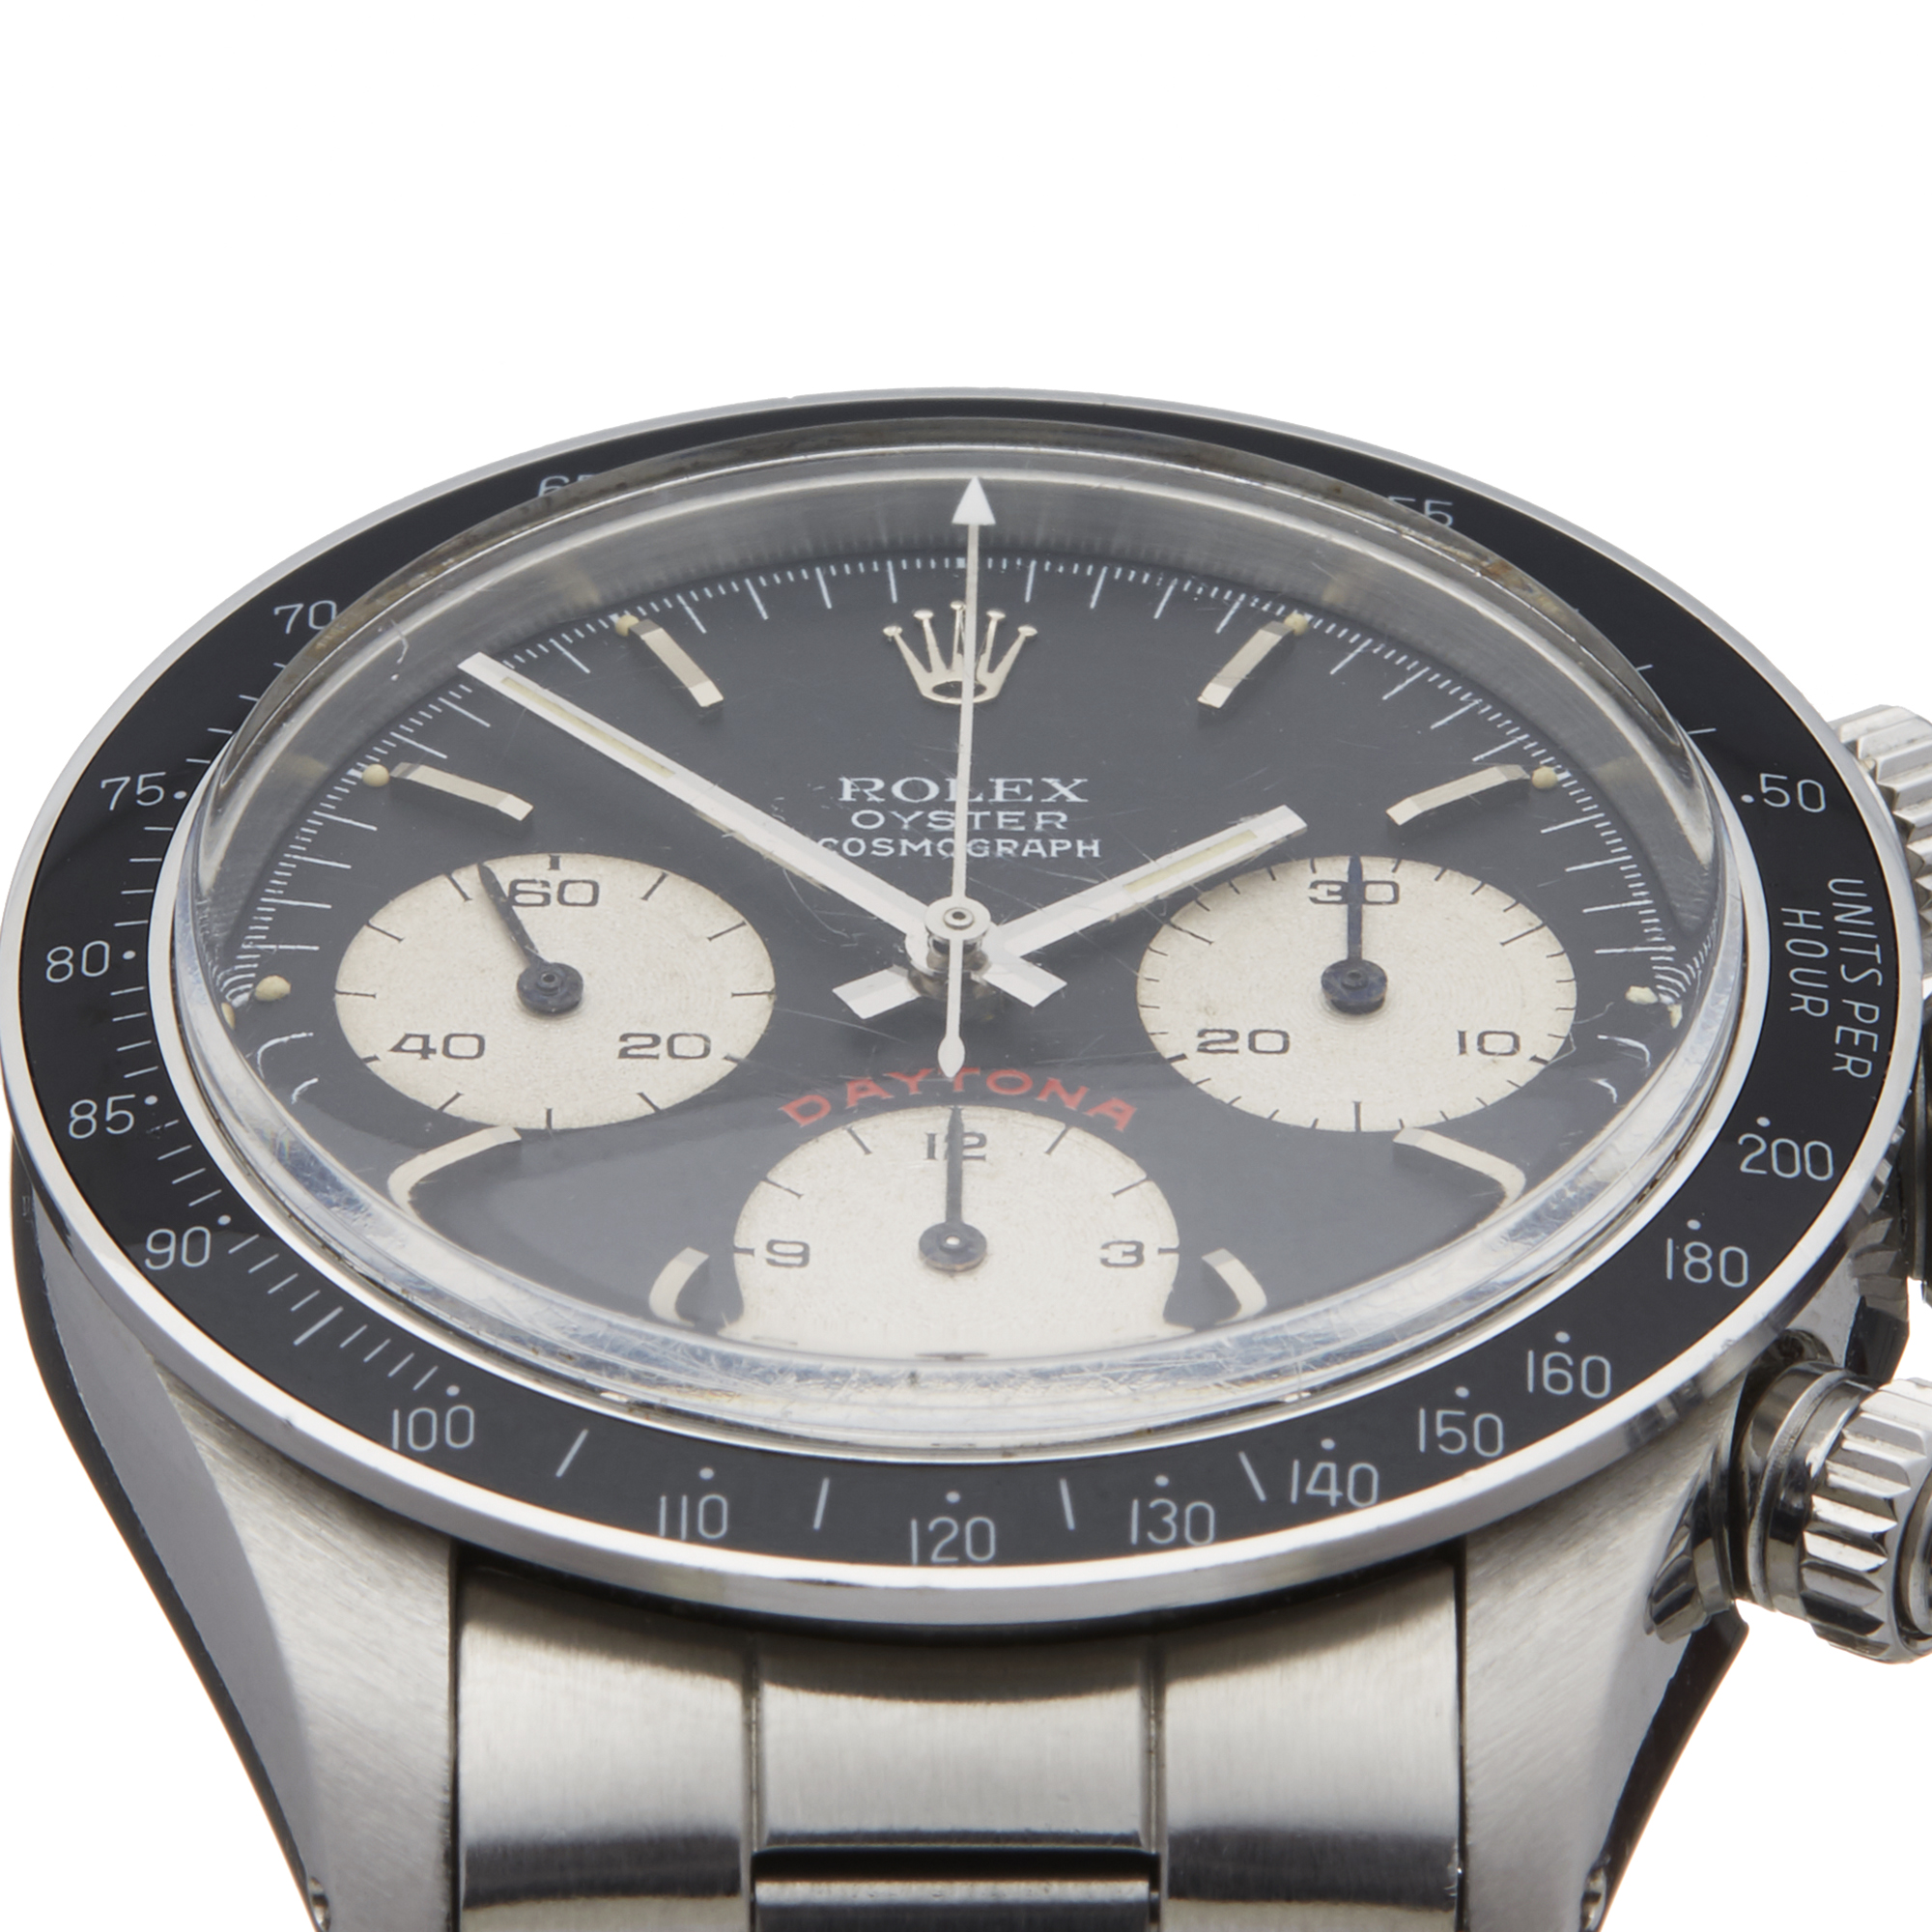 Rolex Daytona Big Red Cosmograph Stainless Steel - 6263 - Image 8 of 9